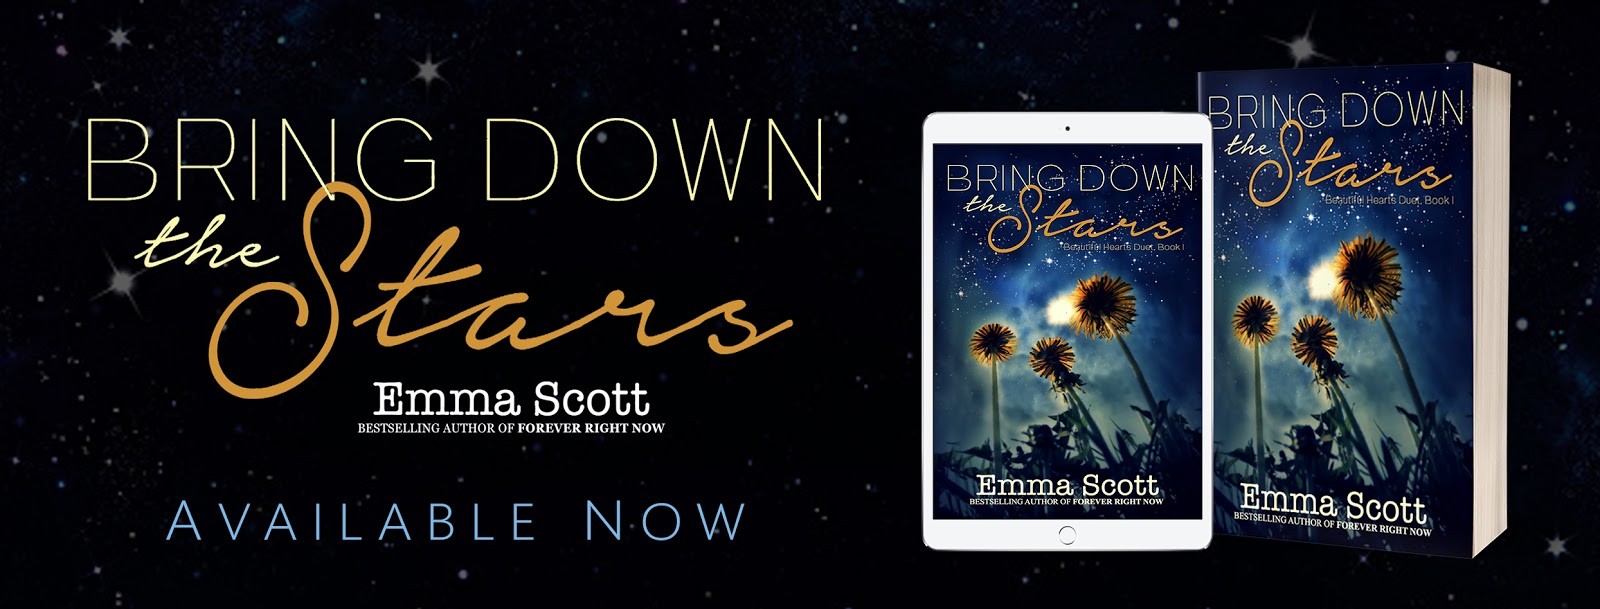 The stars is beautiful. Forever right Now Emma Scott. Bring down the Stars Emma Scott.